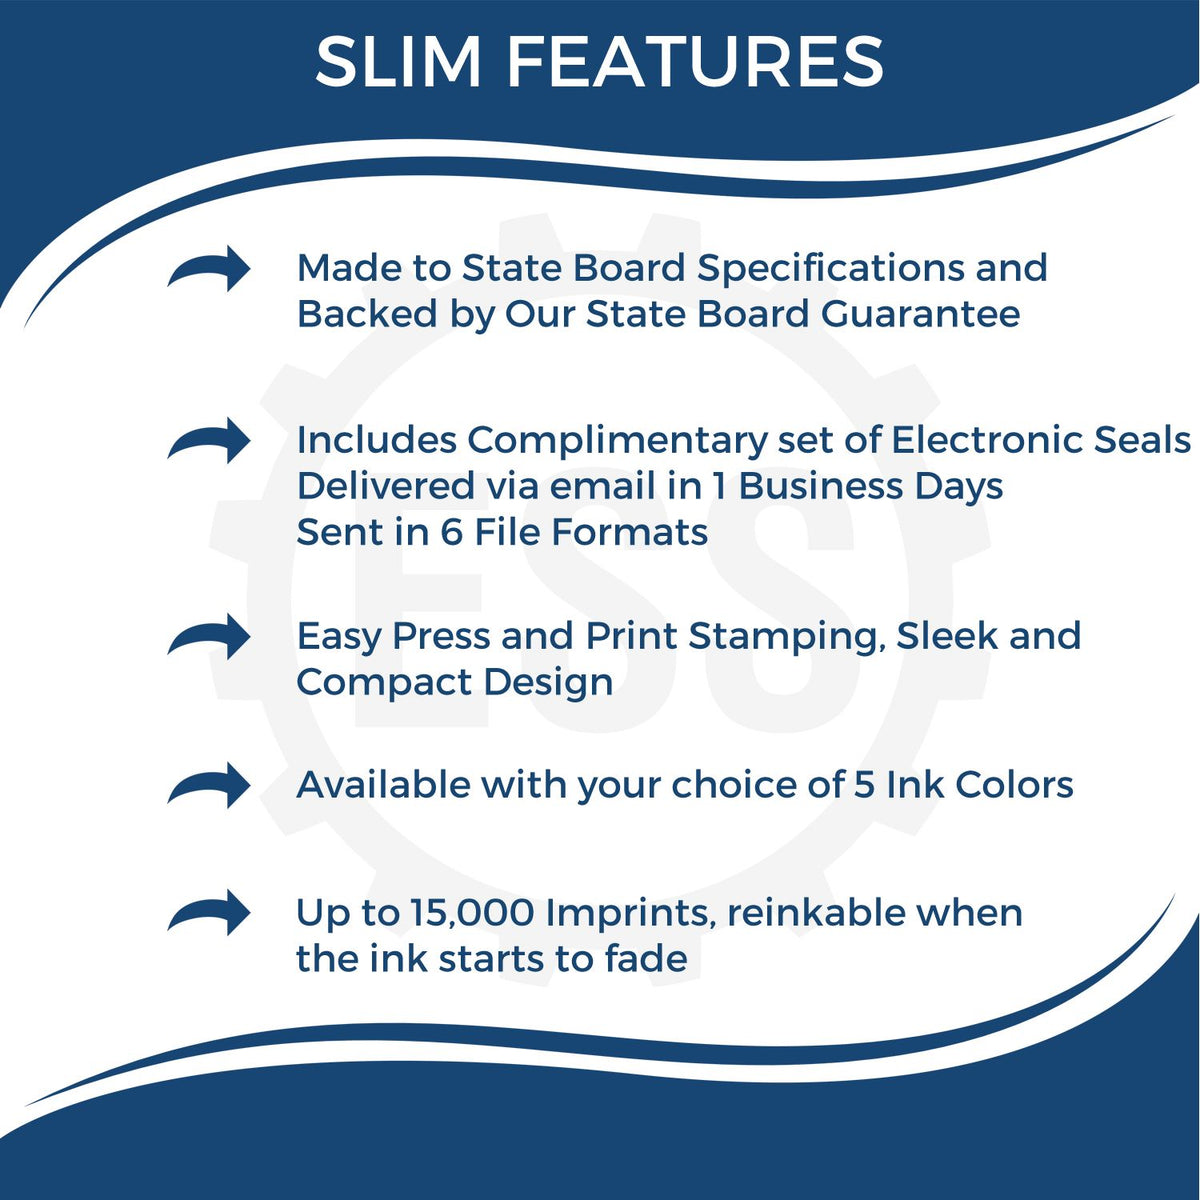 A picture of an infographic highlighting the selling points for the Super Slim Minnesota Notary Public Stamp